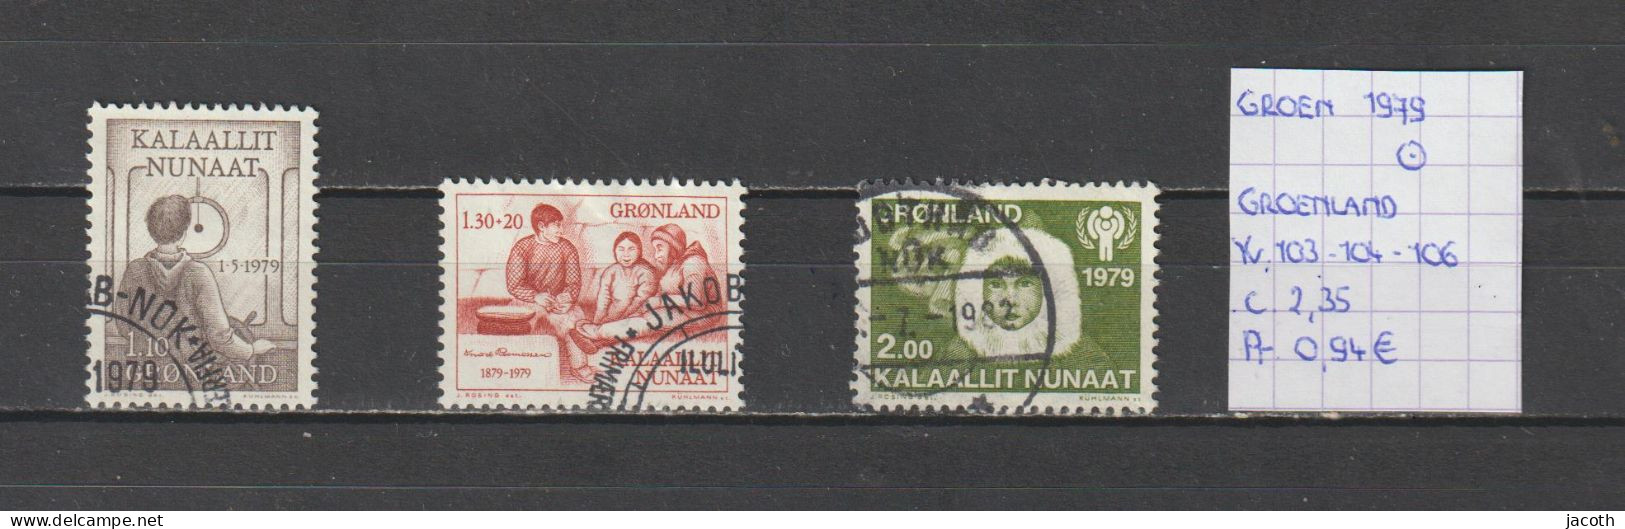 (TJ) Groenland 1979 - YT 103 + 104 + 106 (gest./obl./used) - Used Stamps